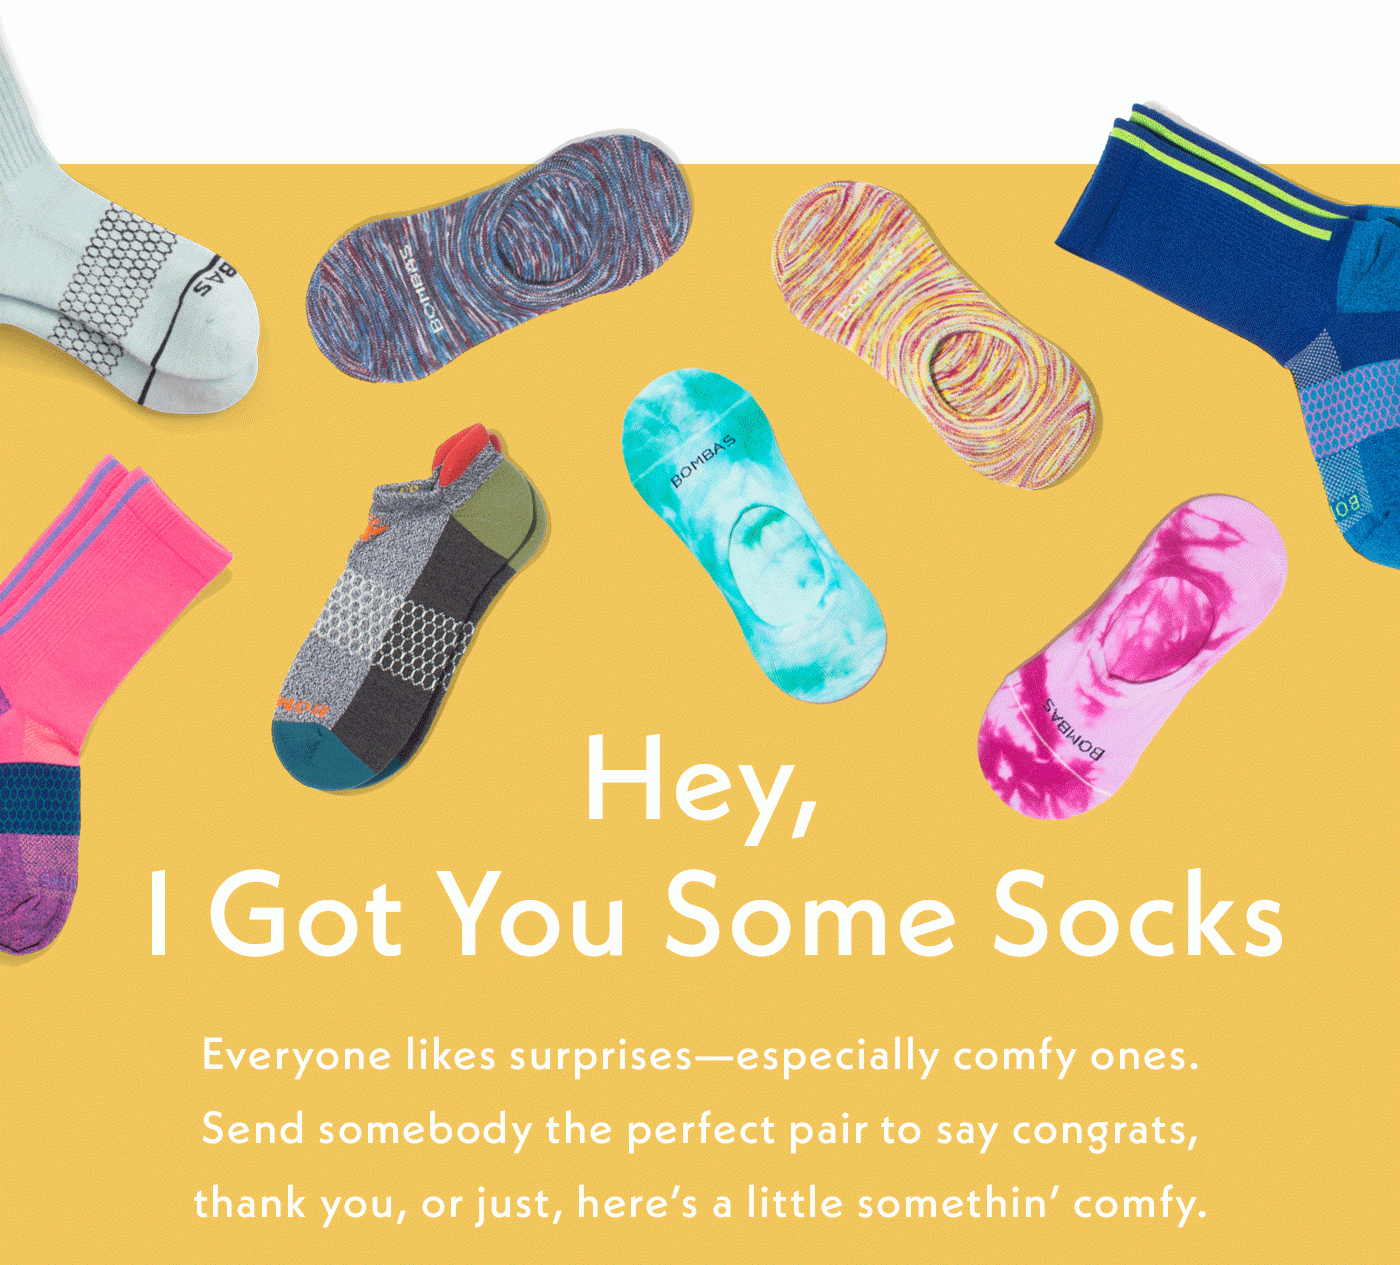 Hey, I got you some socks | Everyone likes surprises - especially comfy ones. Send somebody the perfect pair to say congrats, thank you, or just, here's a little somethin' comfy.